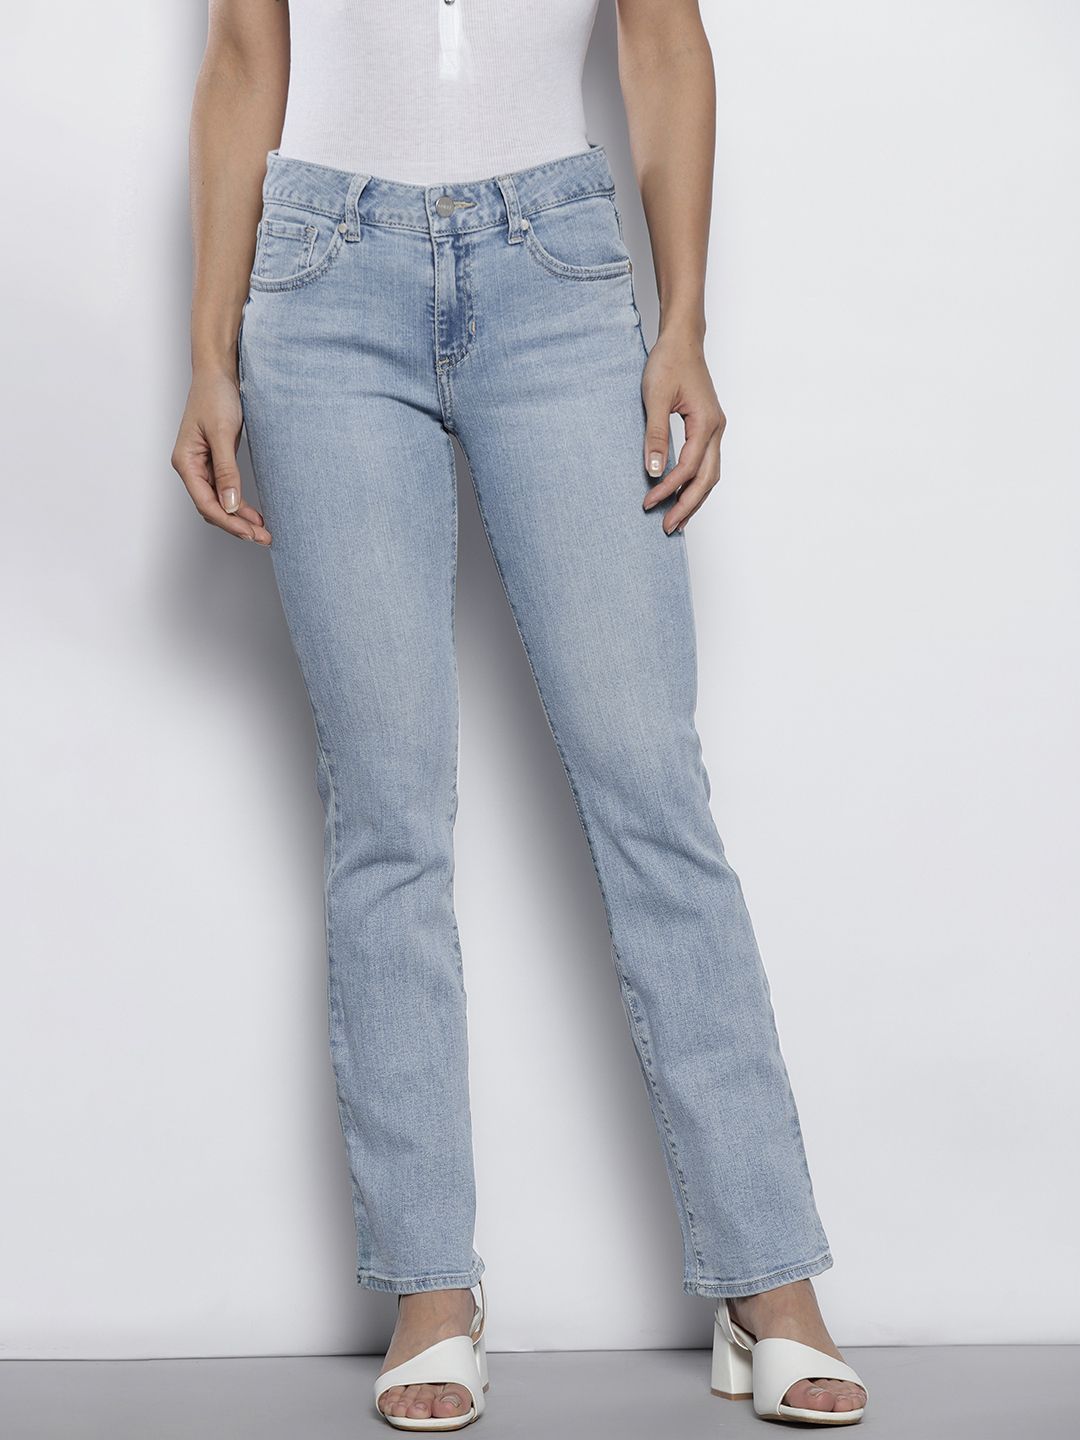 GUESS Women Blue Solid Light Fade Jeans Price in India